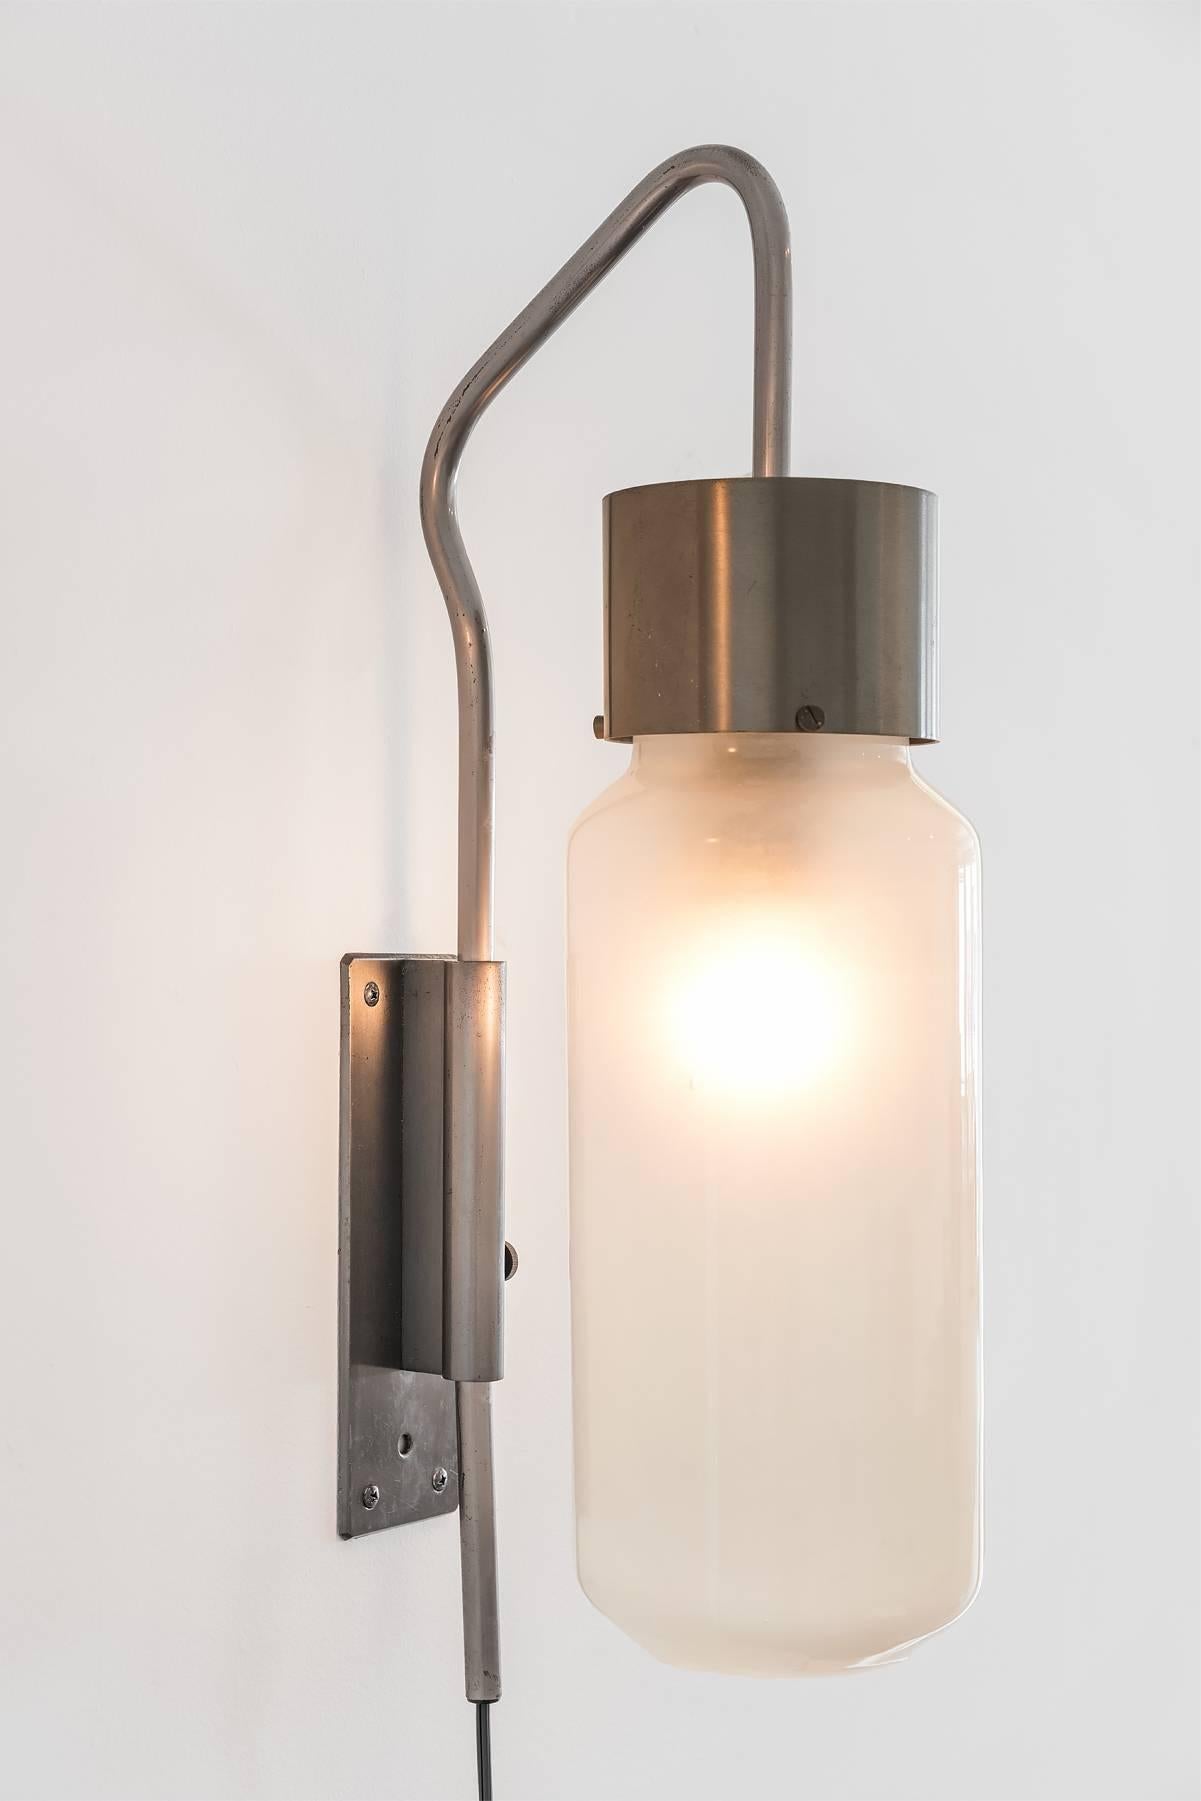 Luigi Caccia Dominioni, LP10 Wall Lamps / Sconces, Steel, Frosted Glass, 1958 In Good Condition In High Point, NC